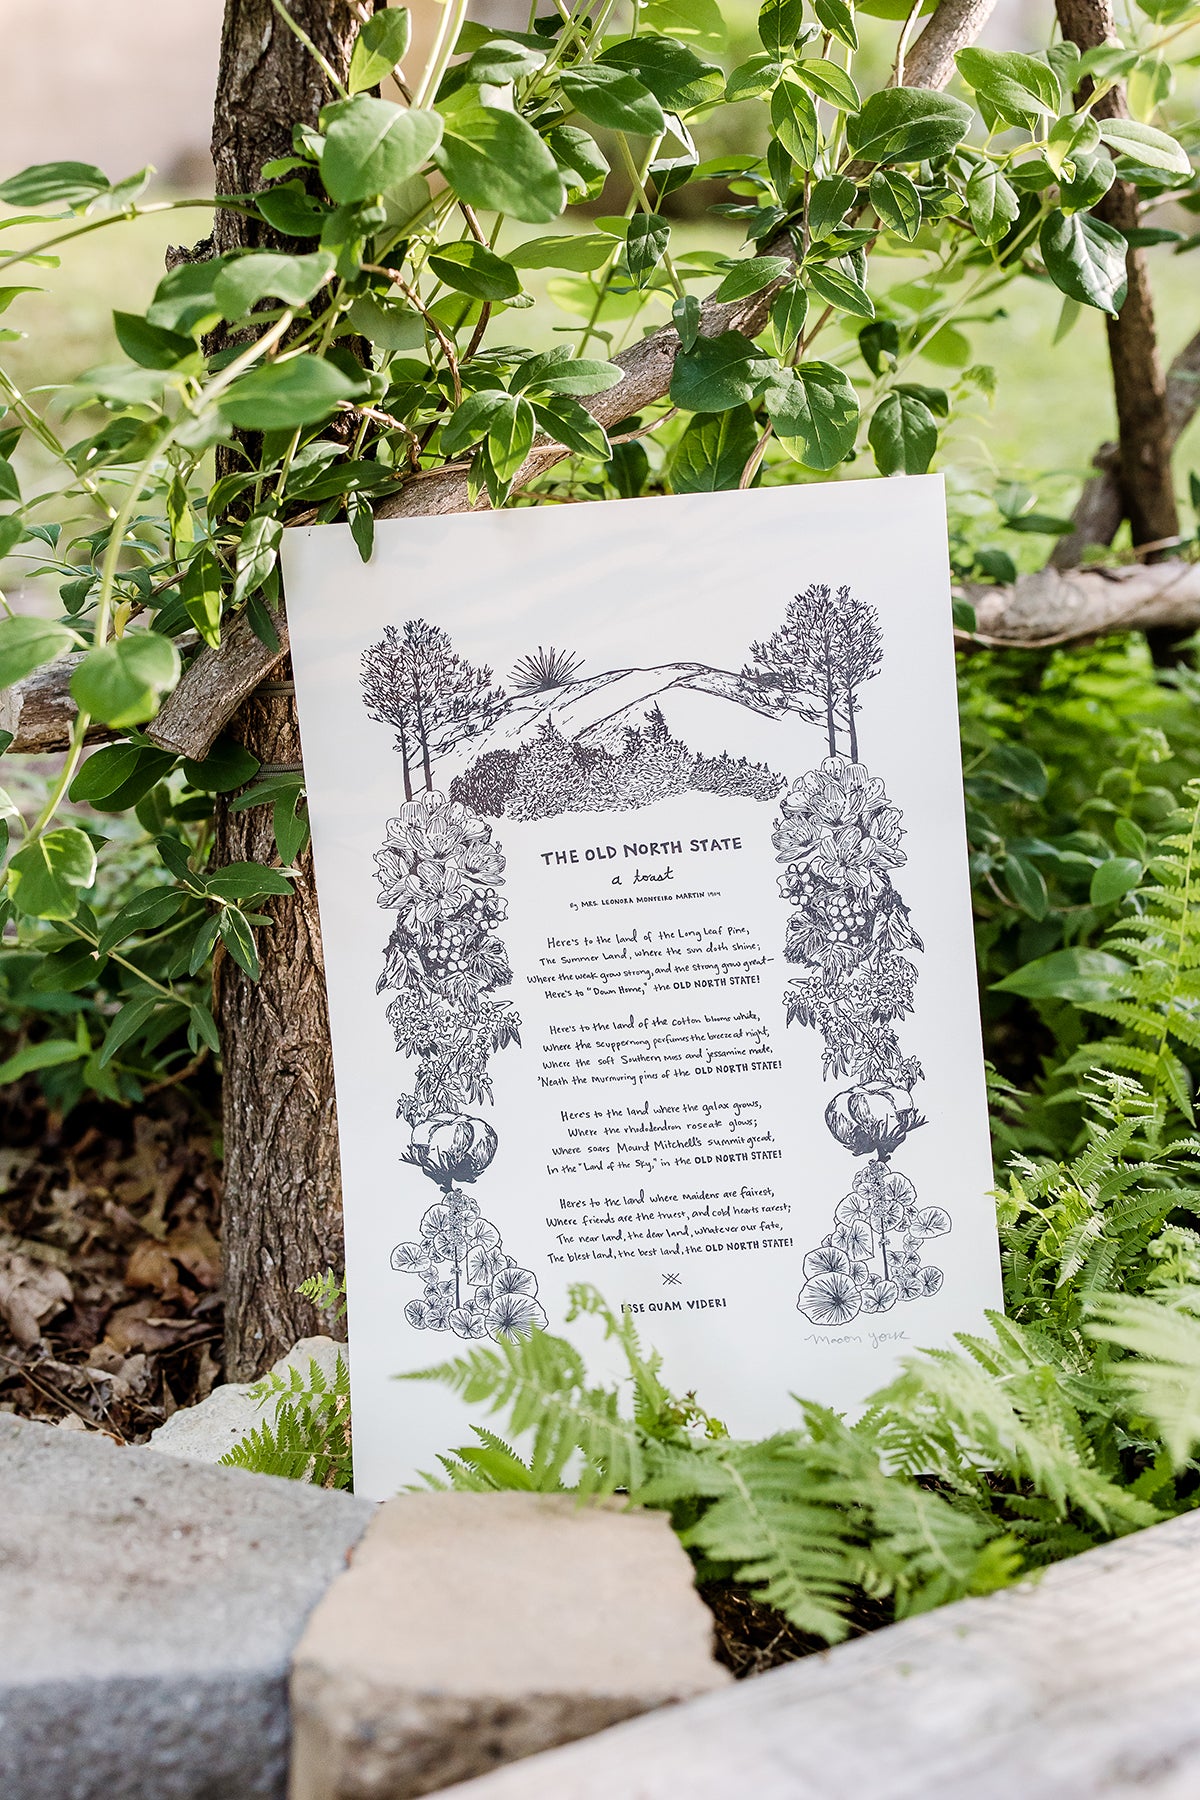 Large letterpress art print featuring "The Old North State," an ode to North Carolina and all her natural beauty, written in 1904 by Mrs. Leonora Monteiro. Macon York has hand-written the entire toast in her whimsical style. All the native plants in the toast are hand-drawn to create a border around the text.  The print is shown outside behind some rocks, in front of an arbor with honeysuckle growing up, and wild ferns to the right. 